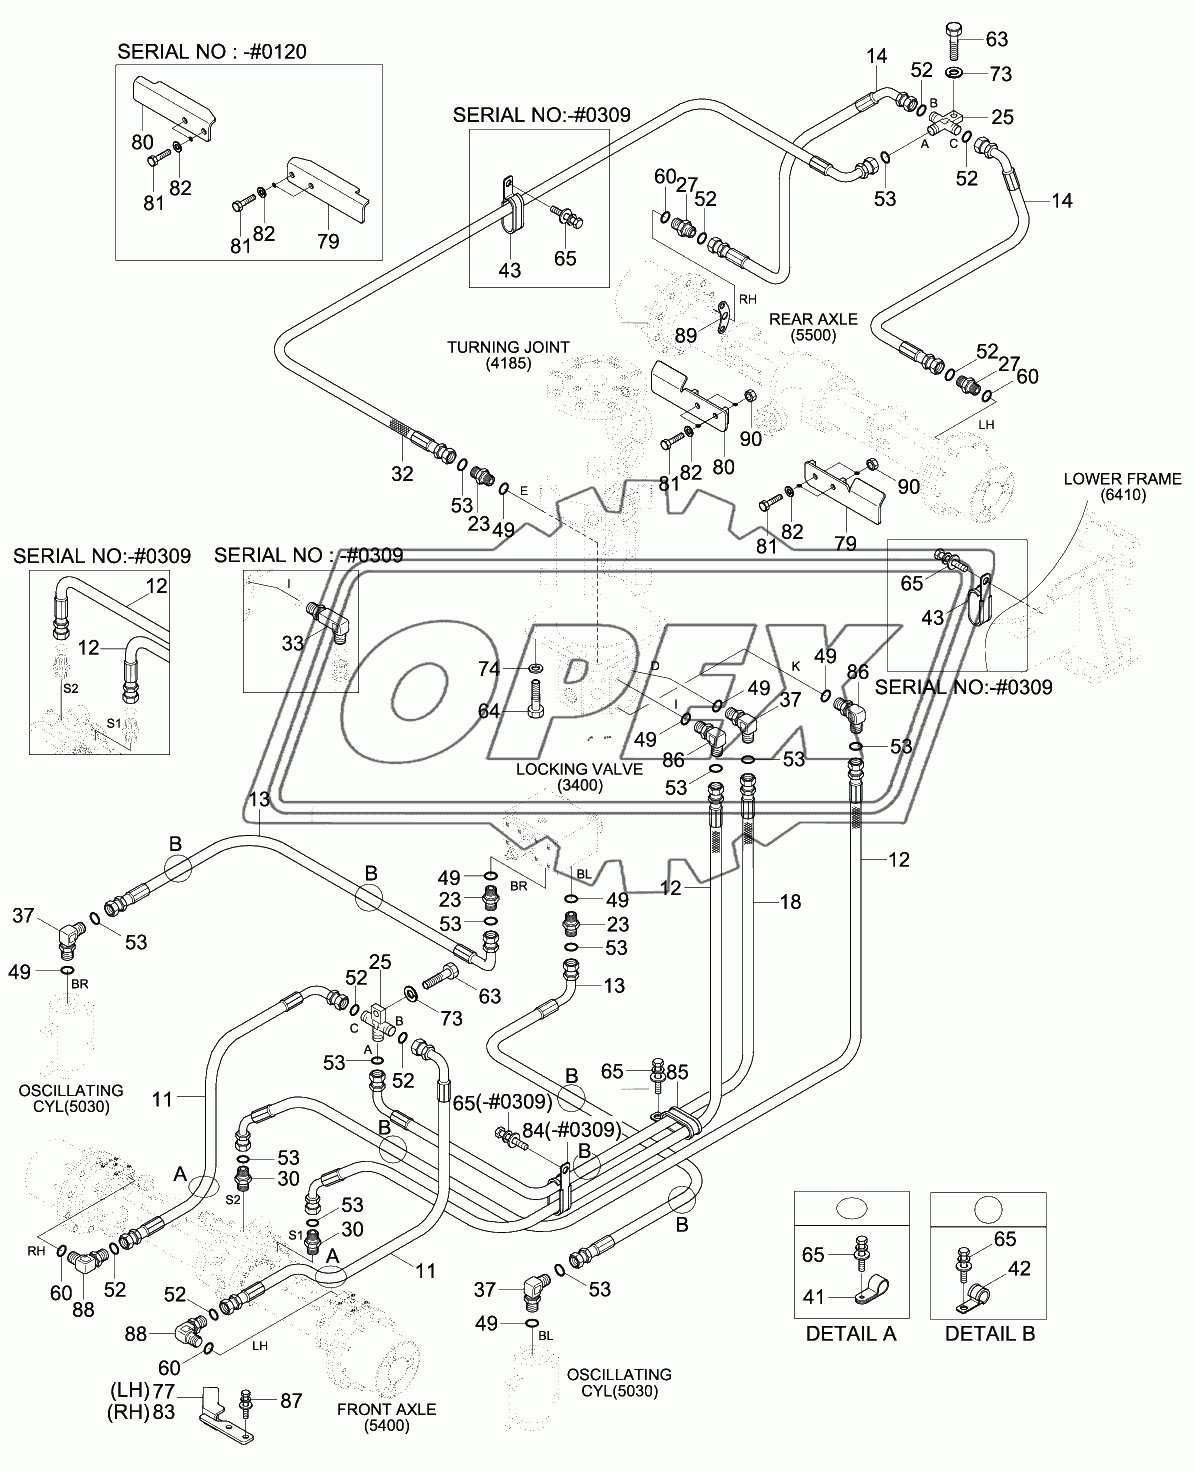 LOWER HYD PIPING 2 (#0074-)